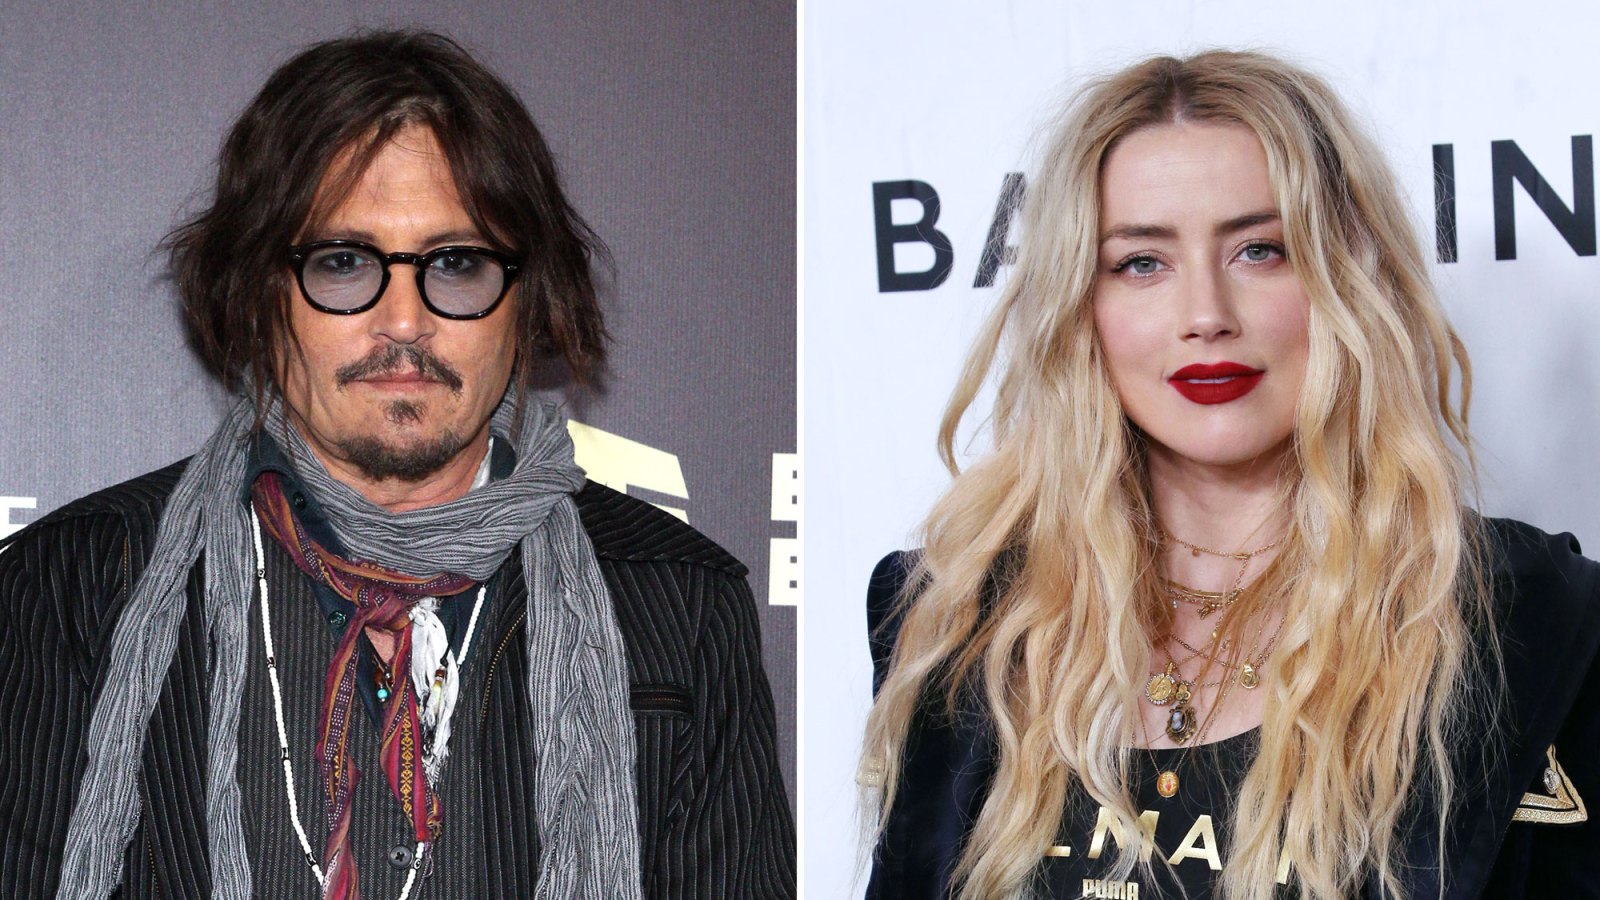 Johnny Depp's Lawyers Respond to Accusations They Led Smear Campaign Against Amber Heard